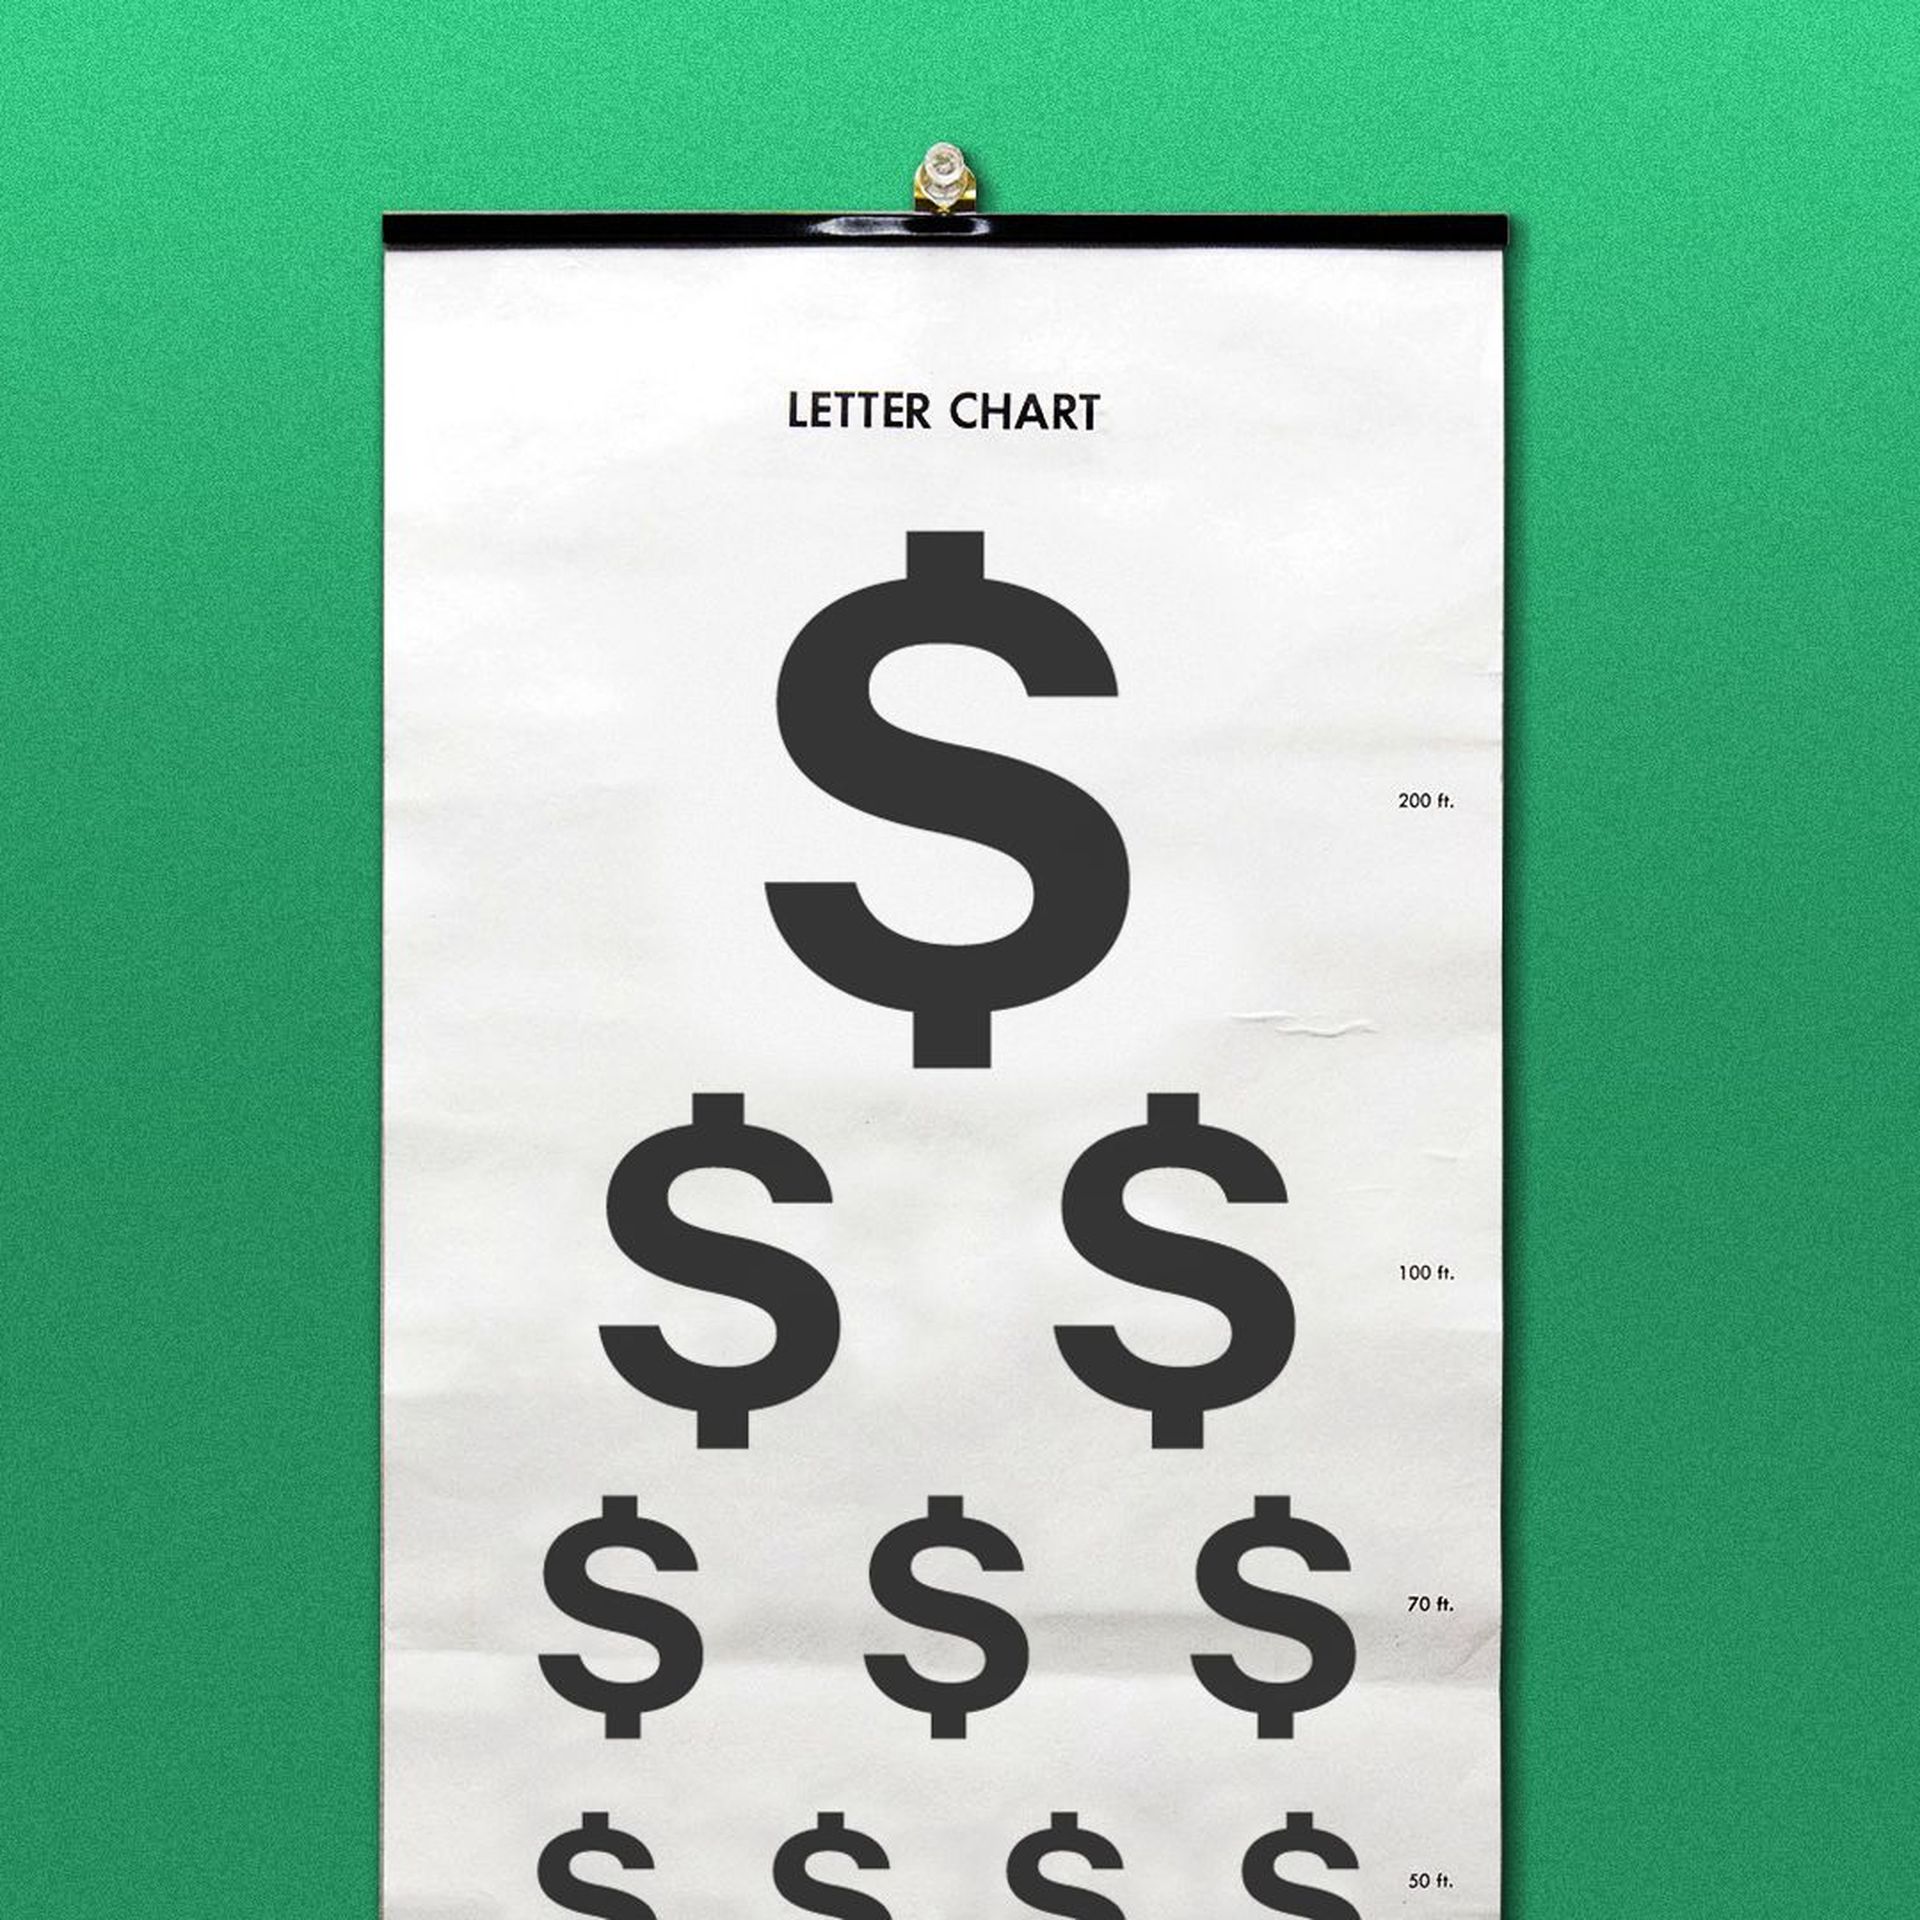 Illustration of an eye chart with dollar signs instead of letters.